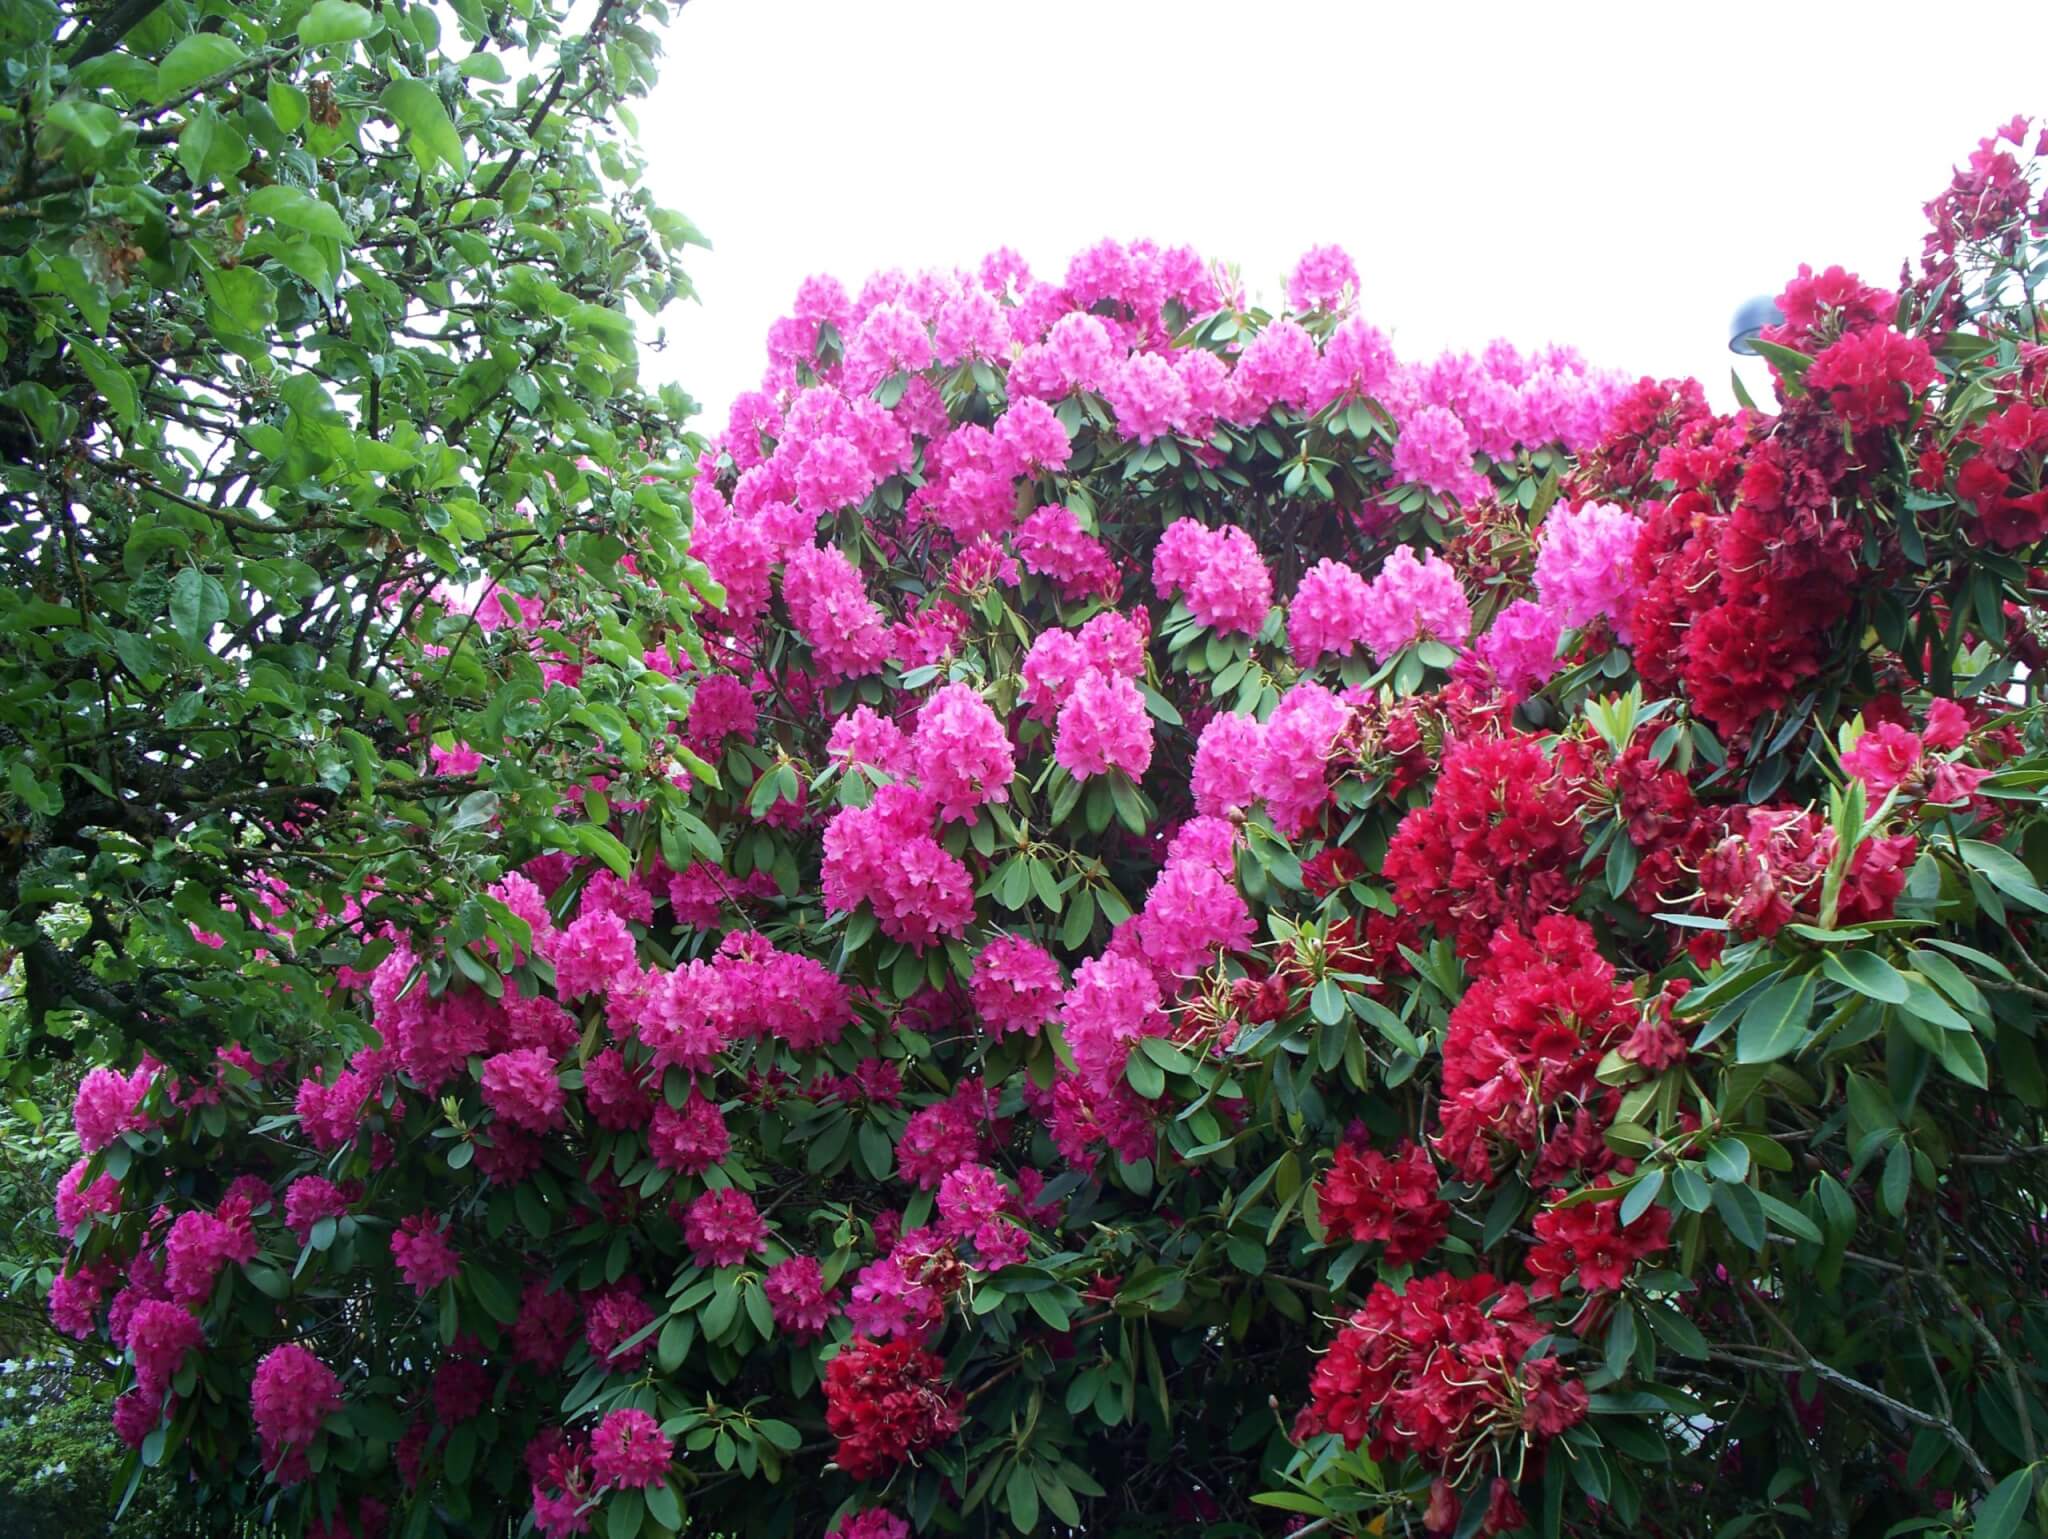 Two rhododendron management contracts on offer from Killarney National Park